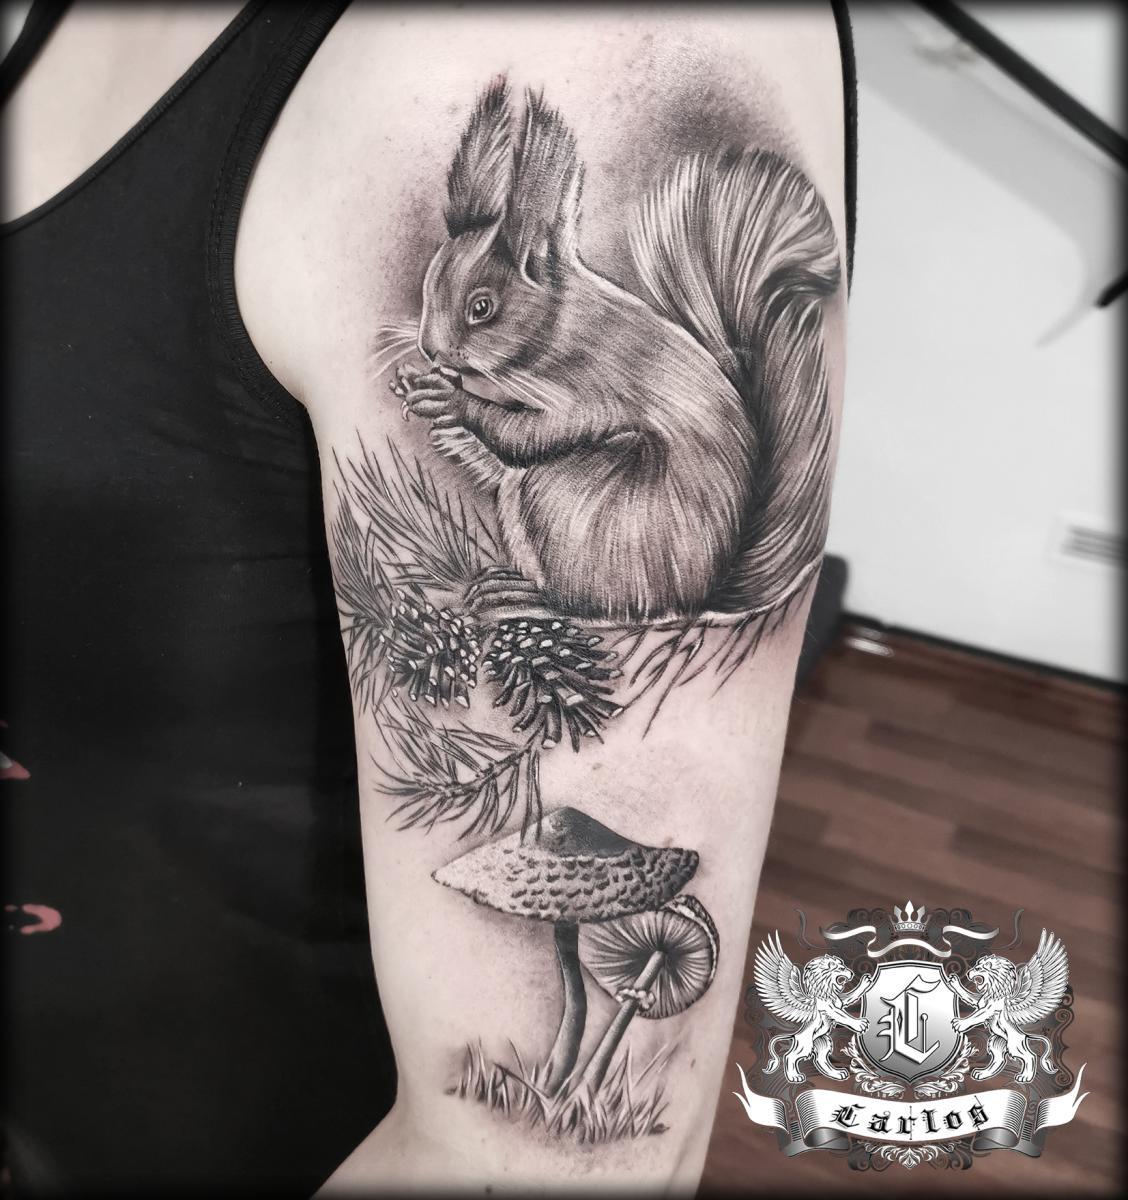 Blog of Vallerik on Tumblr: Squirrel tattoo by Tyler ATD Whistler, Canada  insta: @selfdiagnosed